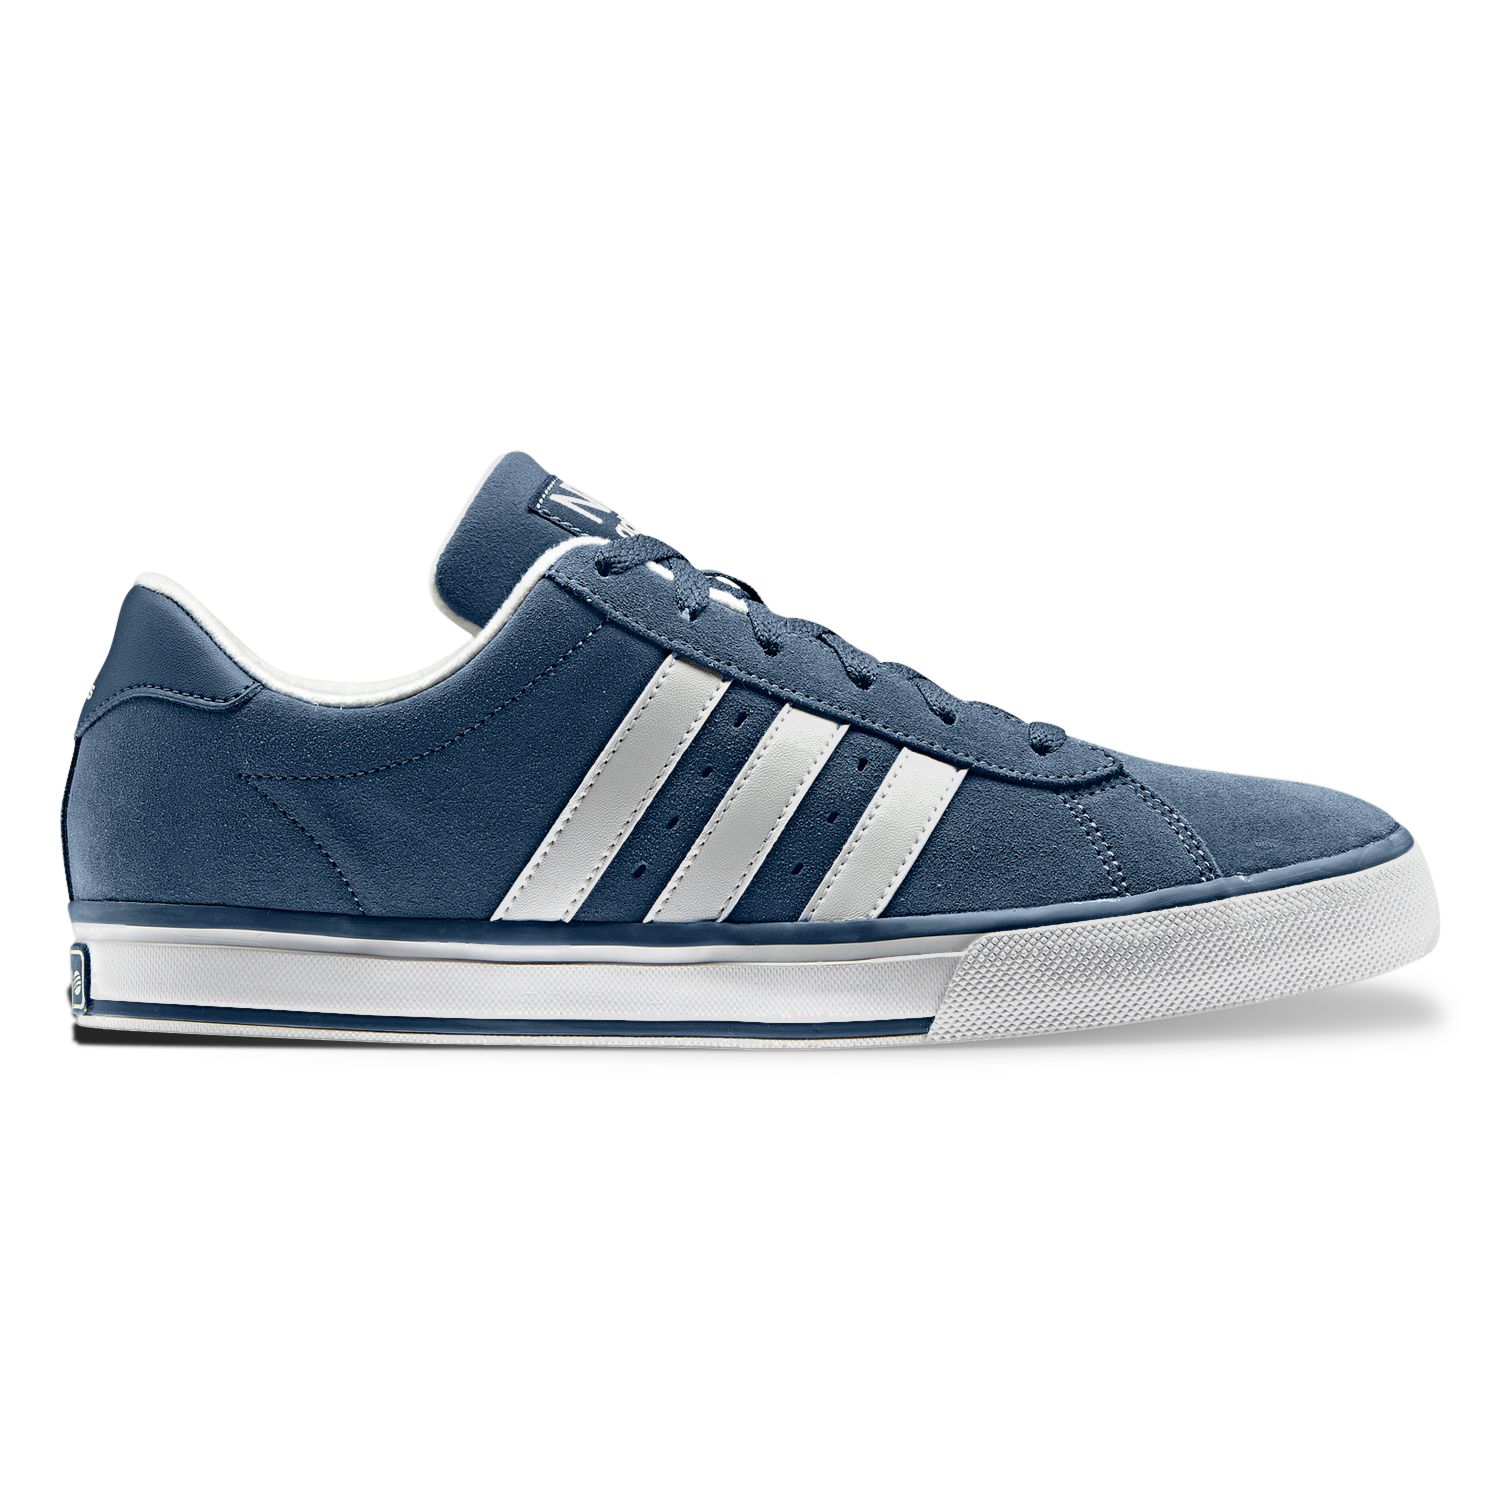 adidas neo daily mens canvas shoes